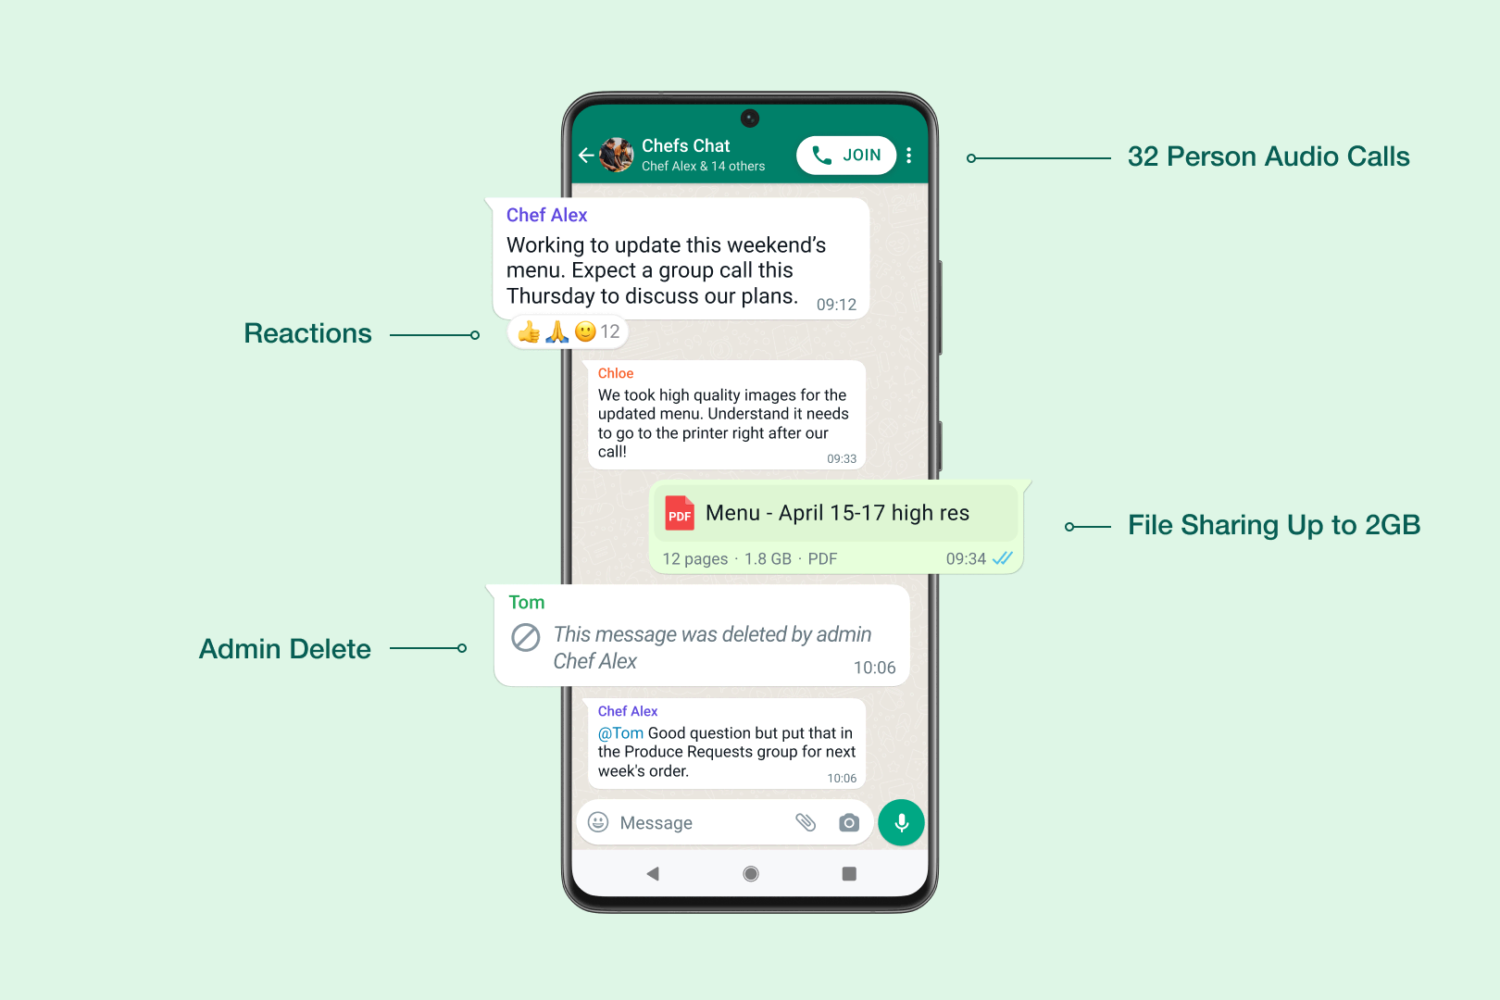 Meta's marketing image showcasing four new features for WhatsApp groups: Emoji reactions, admin delete, 32-person audio calls and file sharing up to 2GB